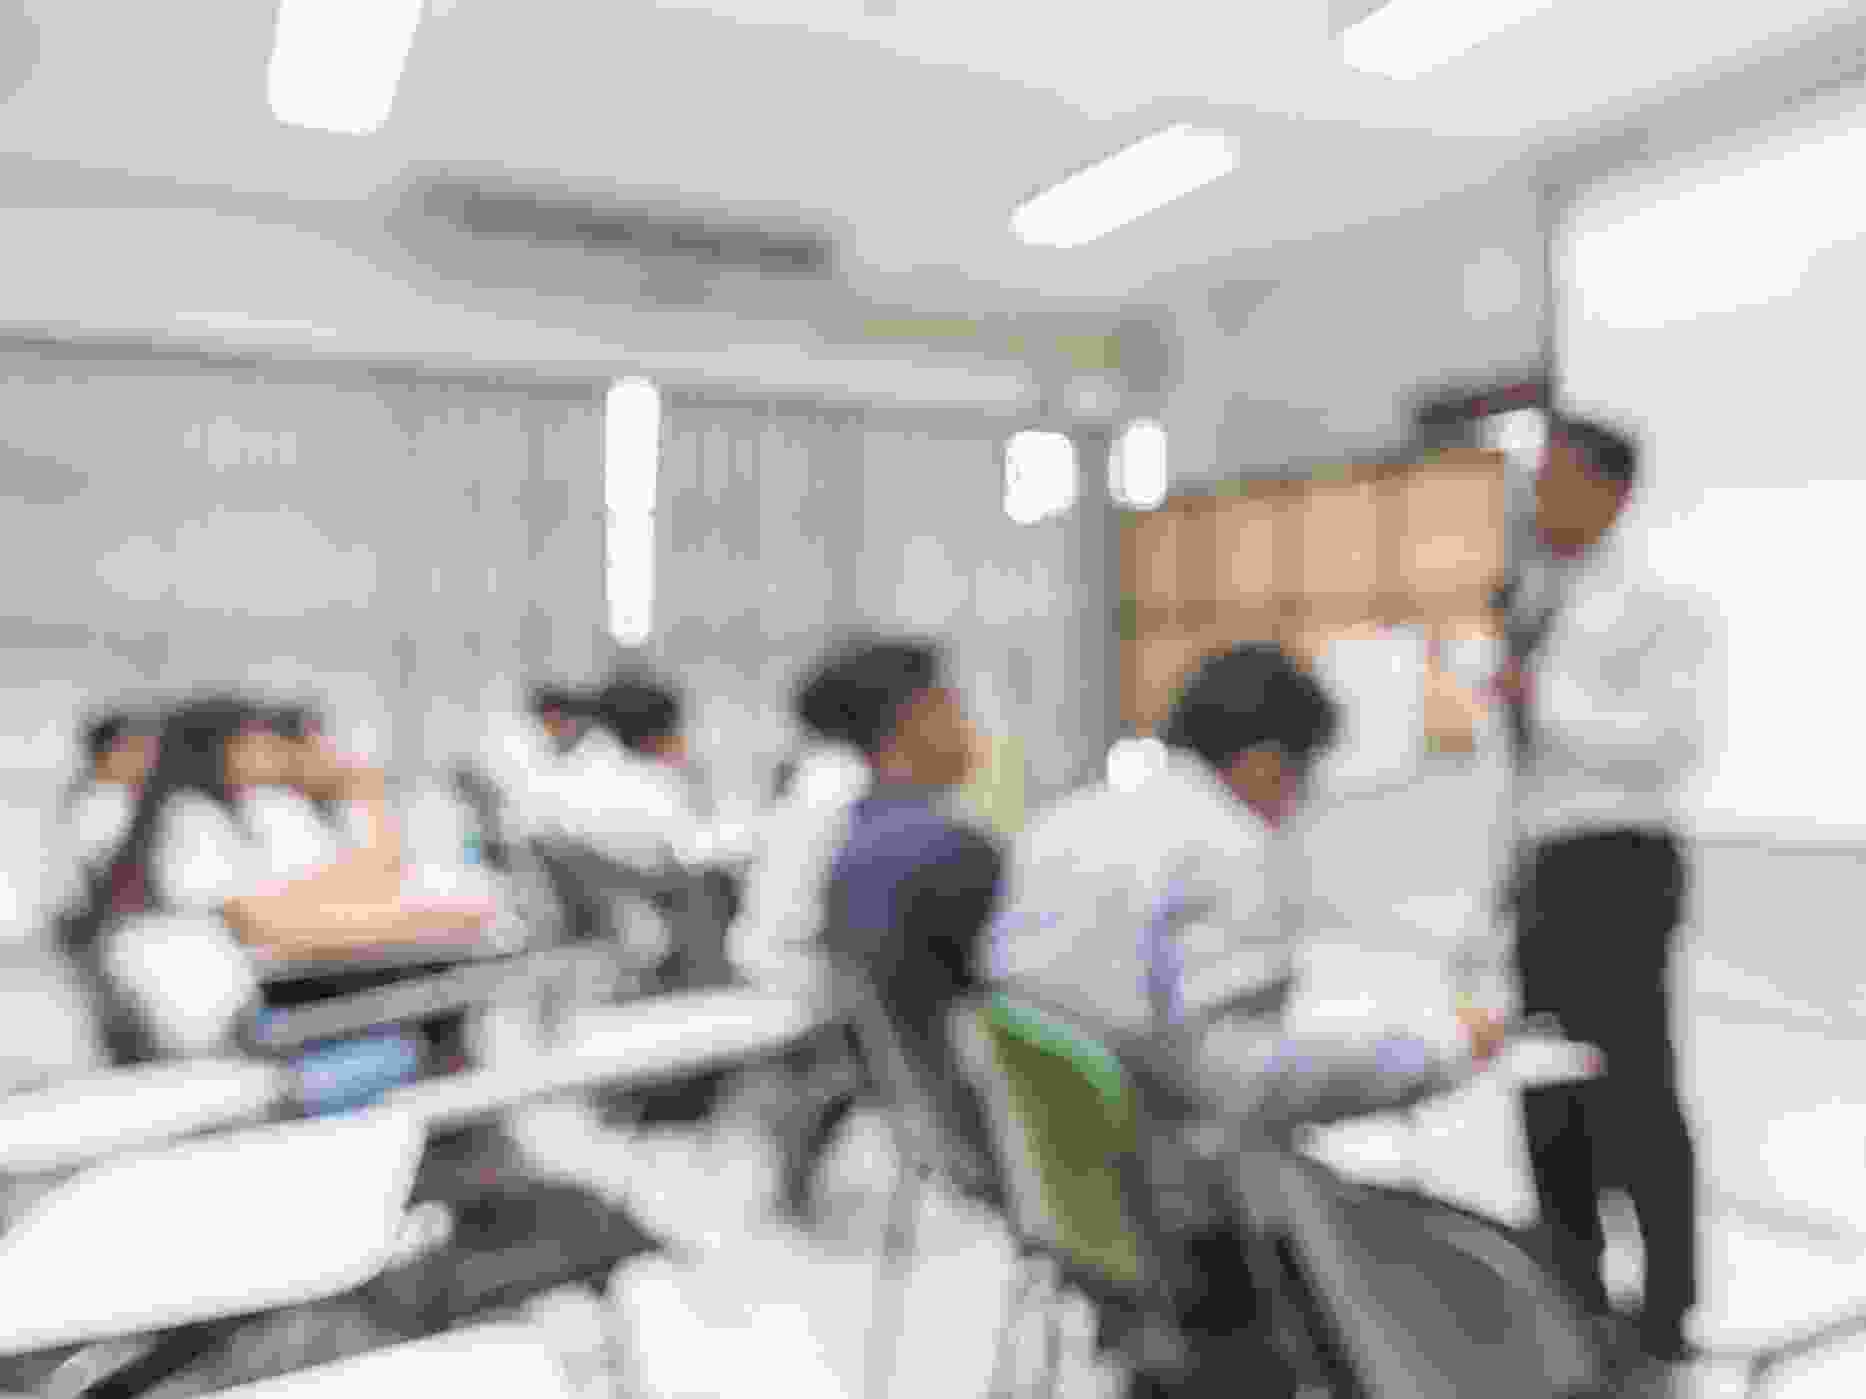 Blurred abstract background of students sitting in classroom with teacher in front of class.